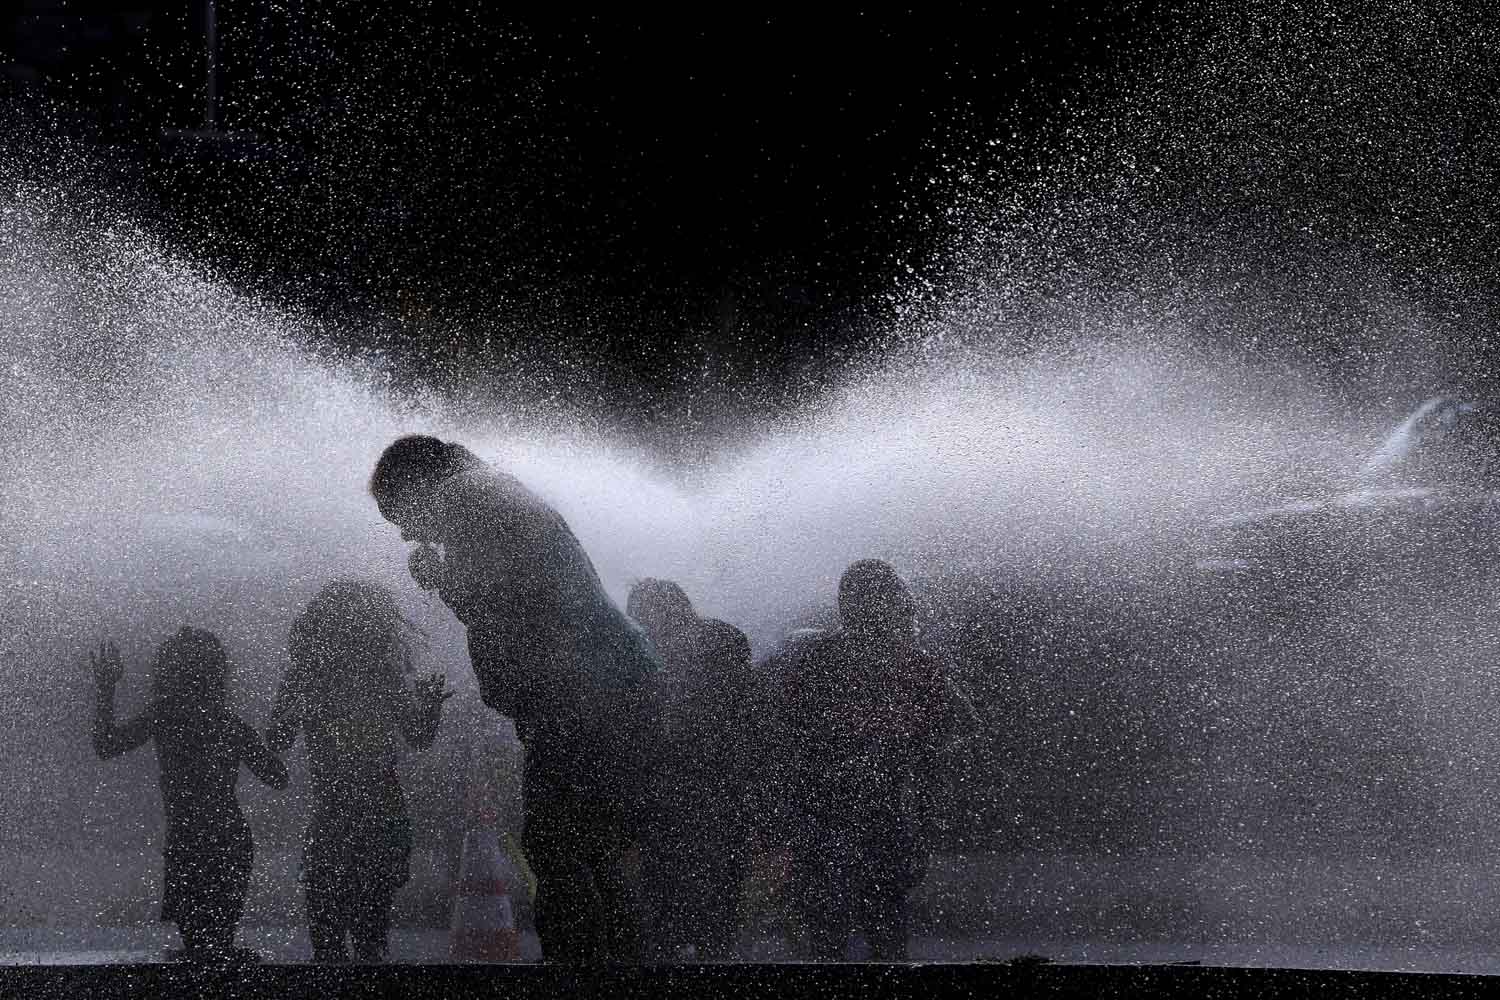 July 16, 2013. People cool off in the spray of an open hydrant on a hot evening in Lawrence, Mass.